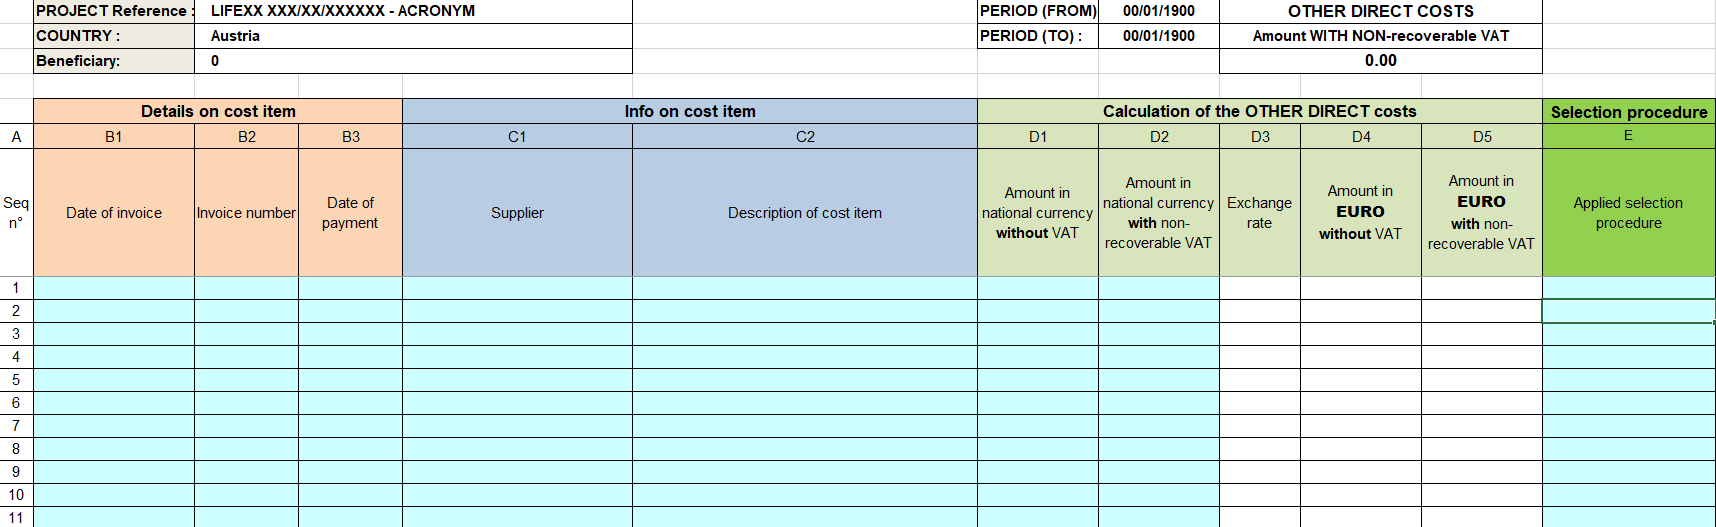 How to report costs of affiliated entities in a Life Project?